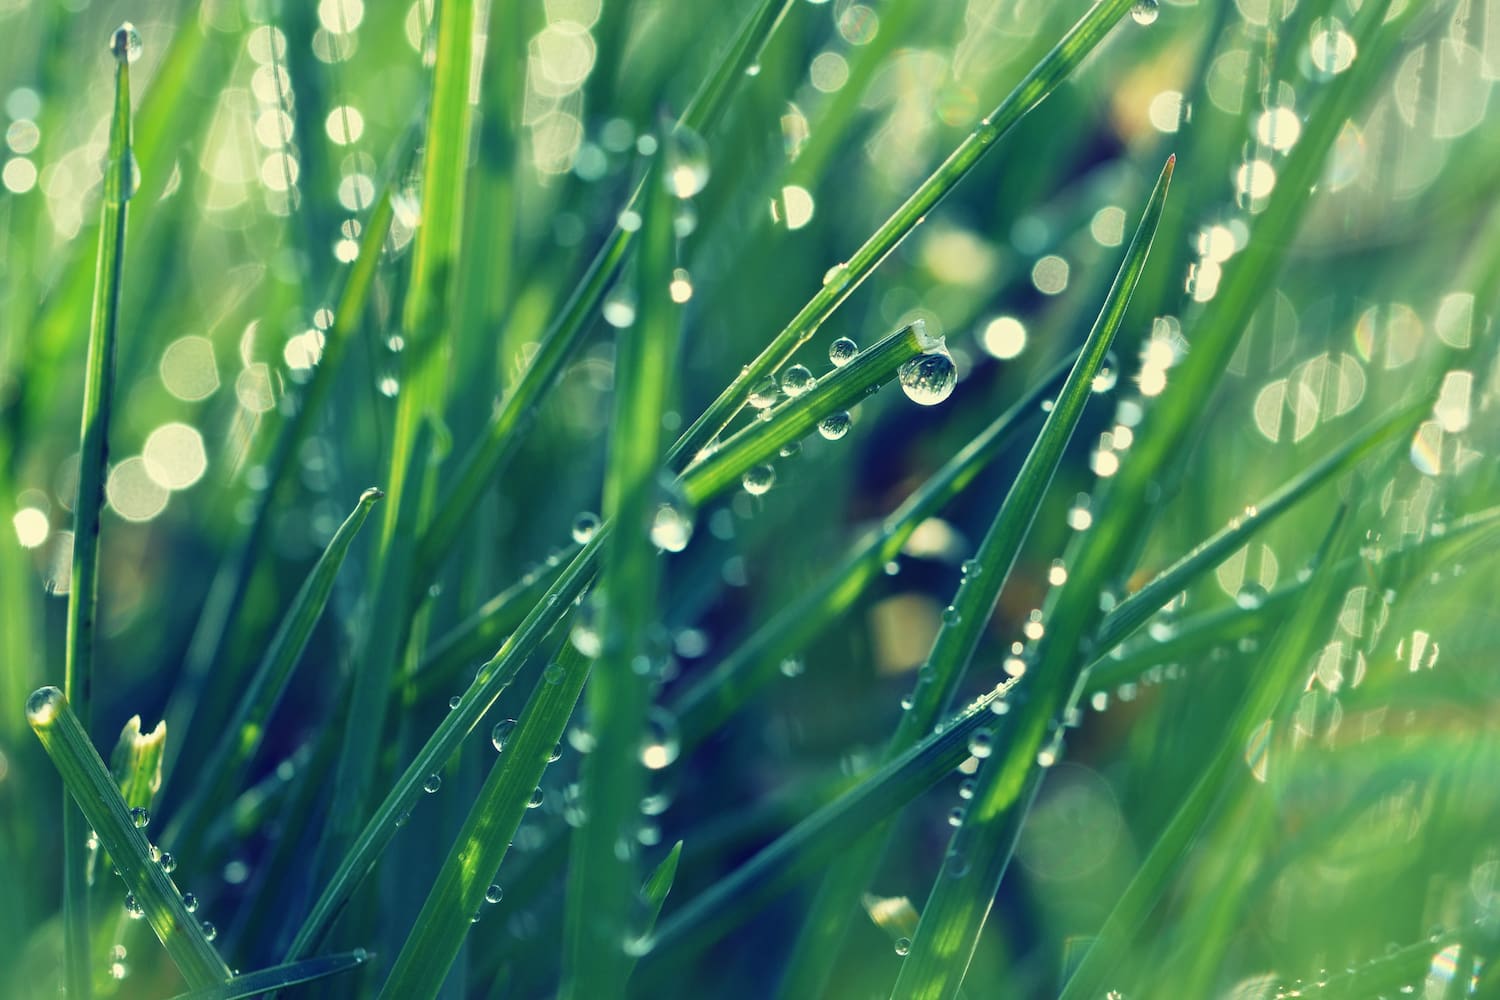 Grass with dewdrops in the foreground